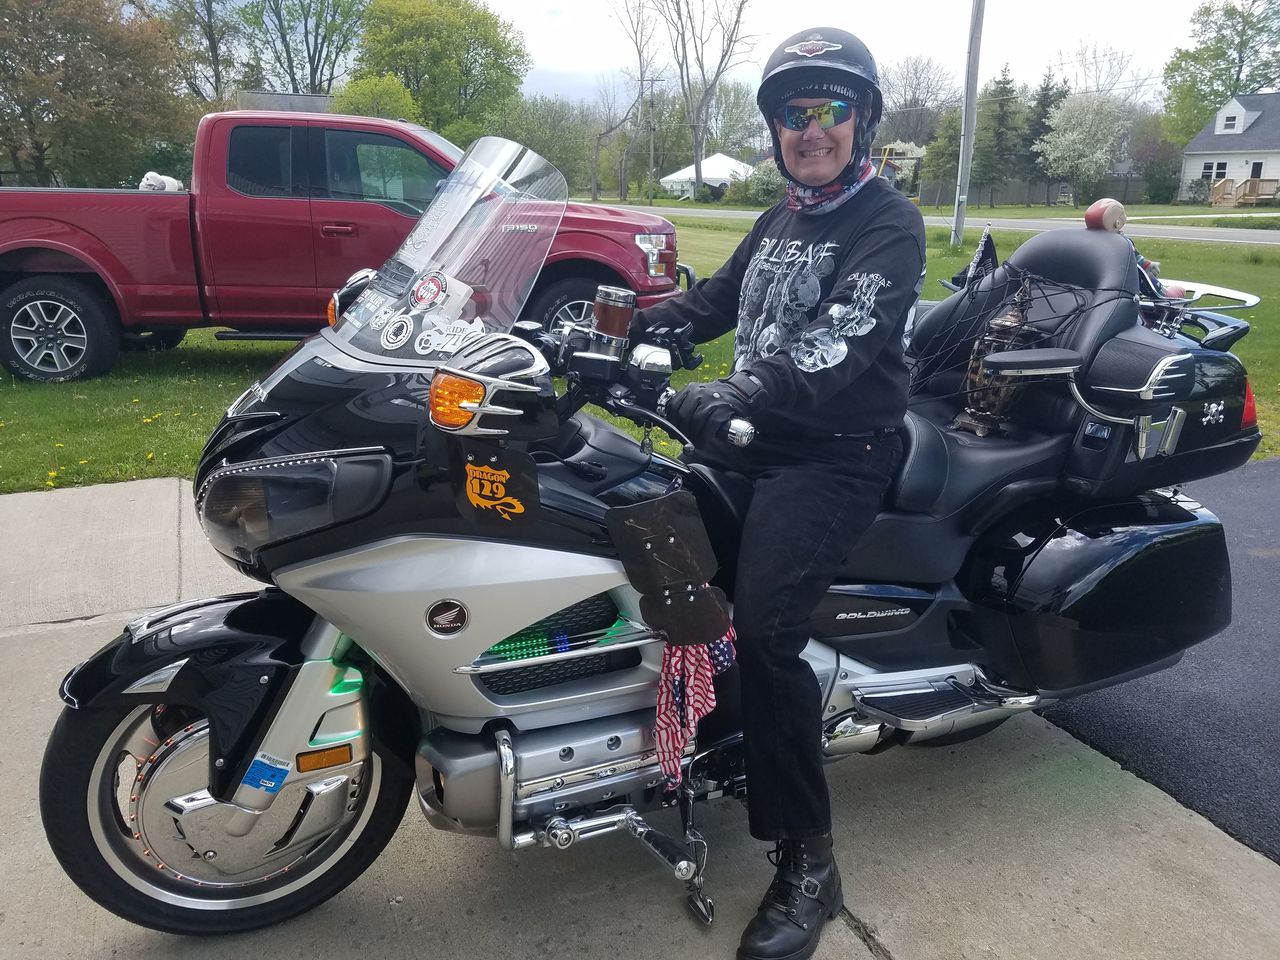 Taking my Mom for a ride on Mother's Day